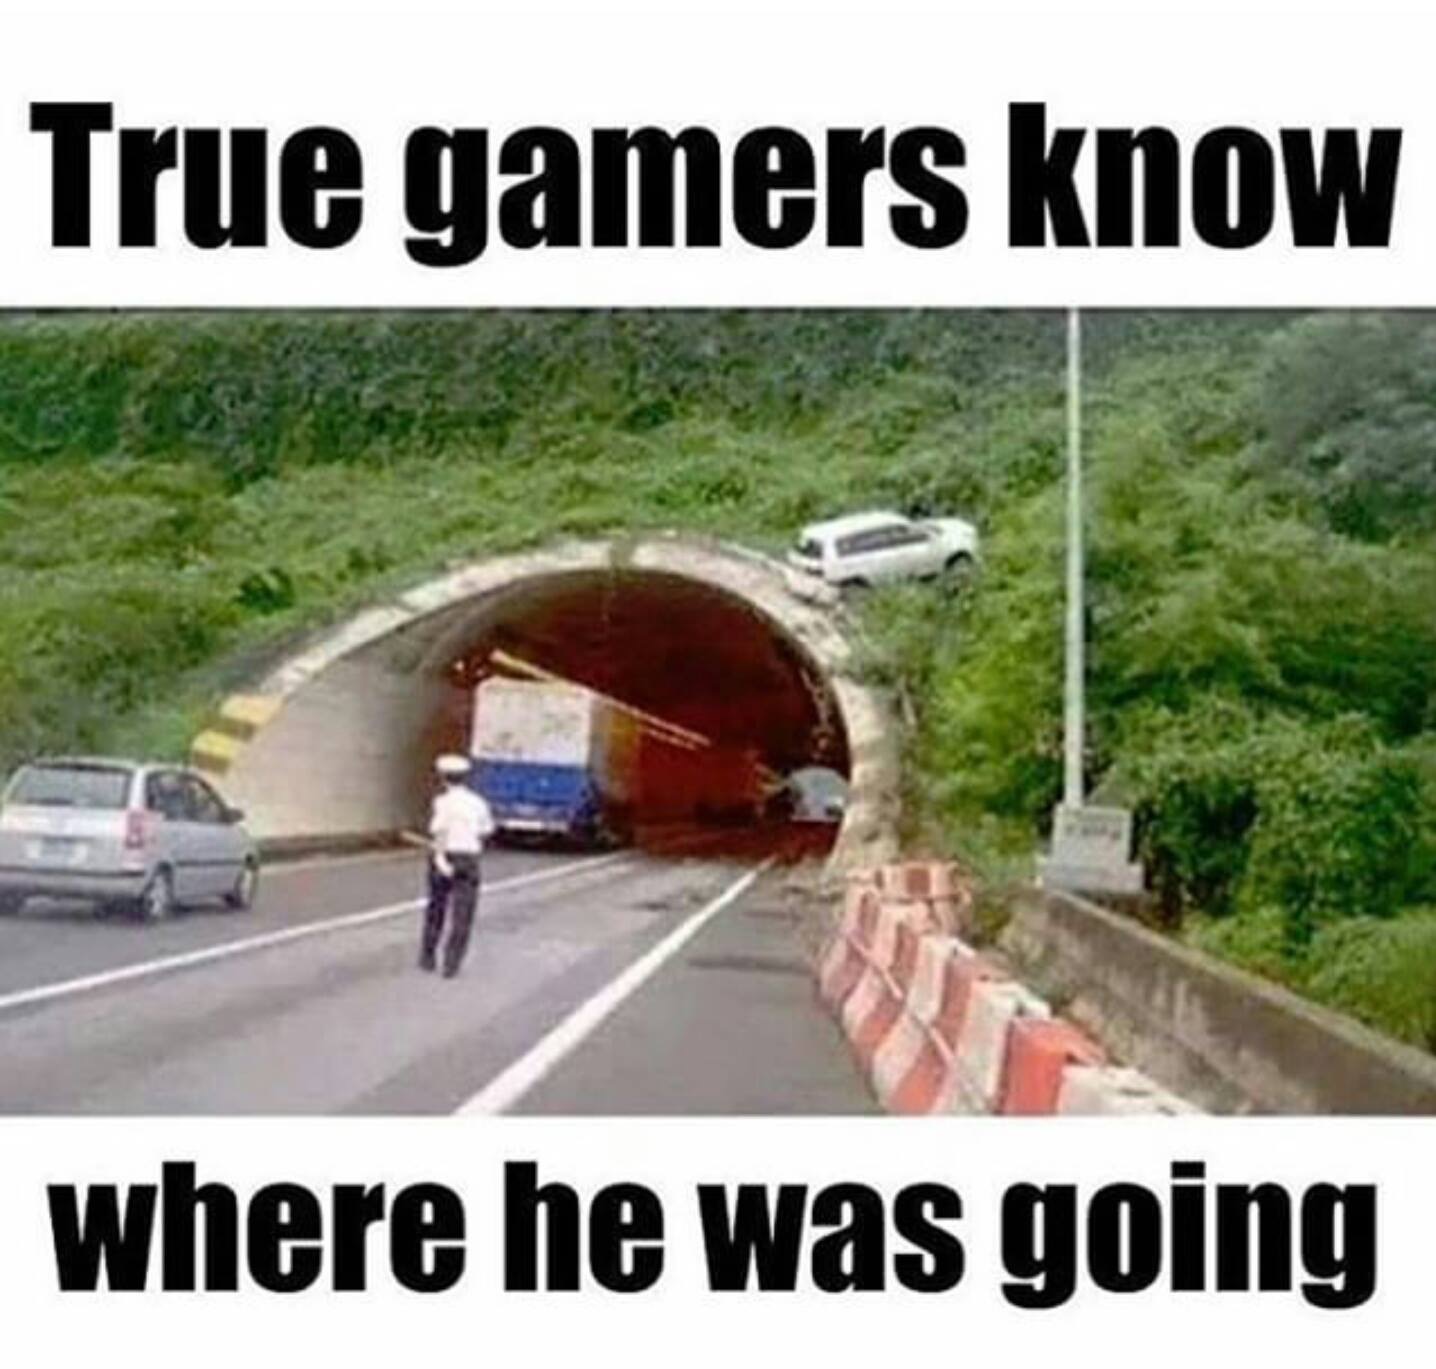 true gamers know where he was going - True gamers know where he was going